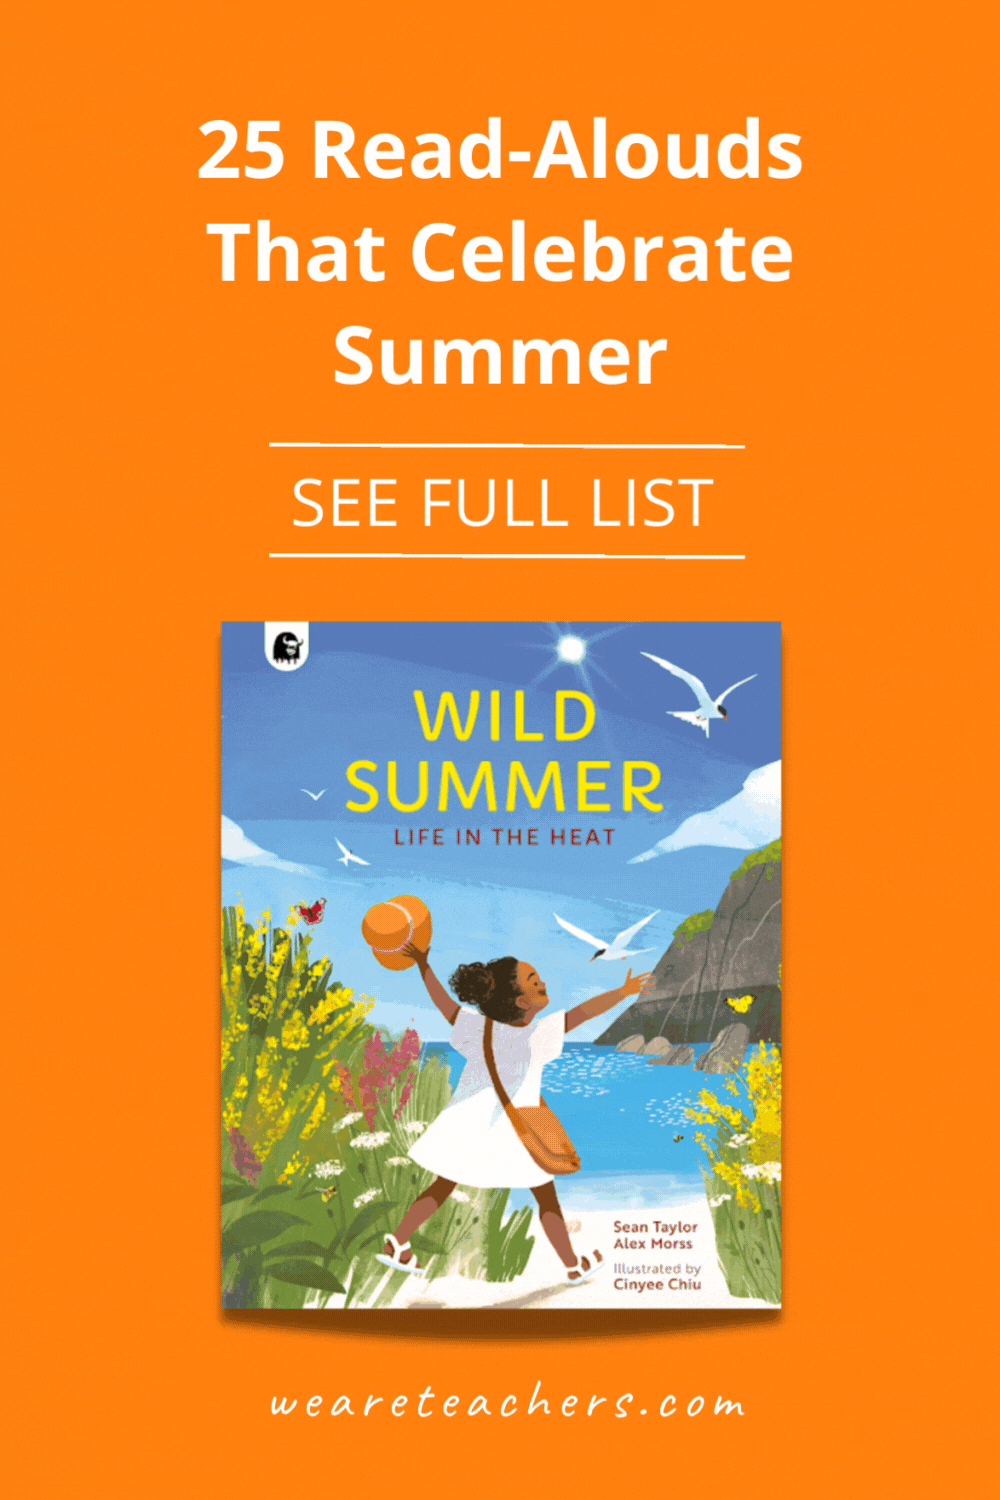 Sunshine, waves, lemonade stands—there's a lot to love about summer. These summer read-alouds capture the season's most beautiful moments.